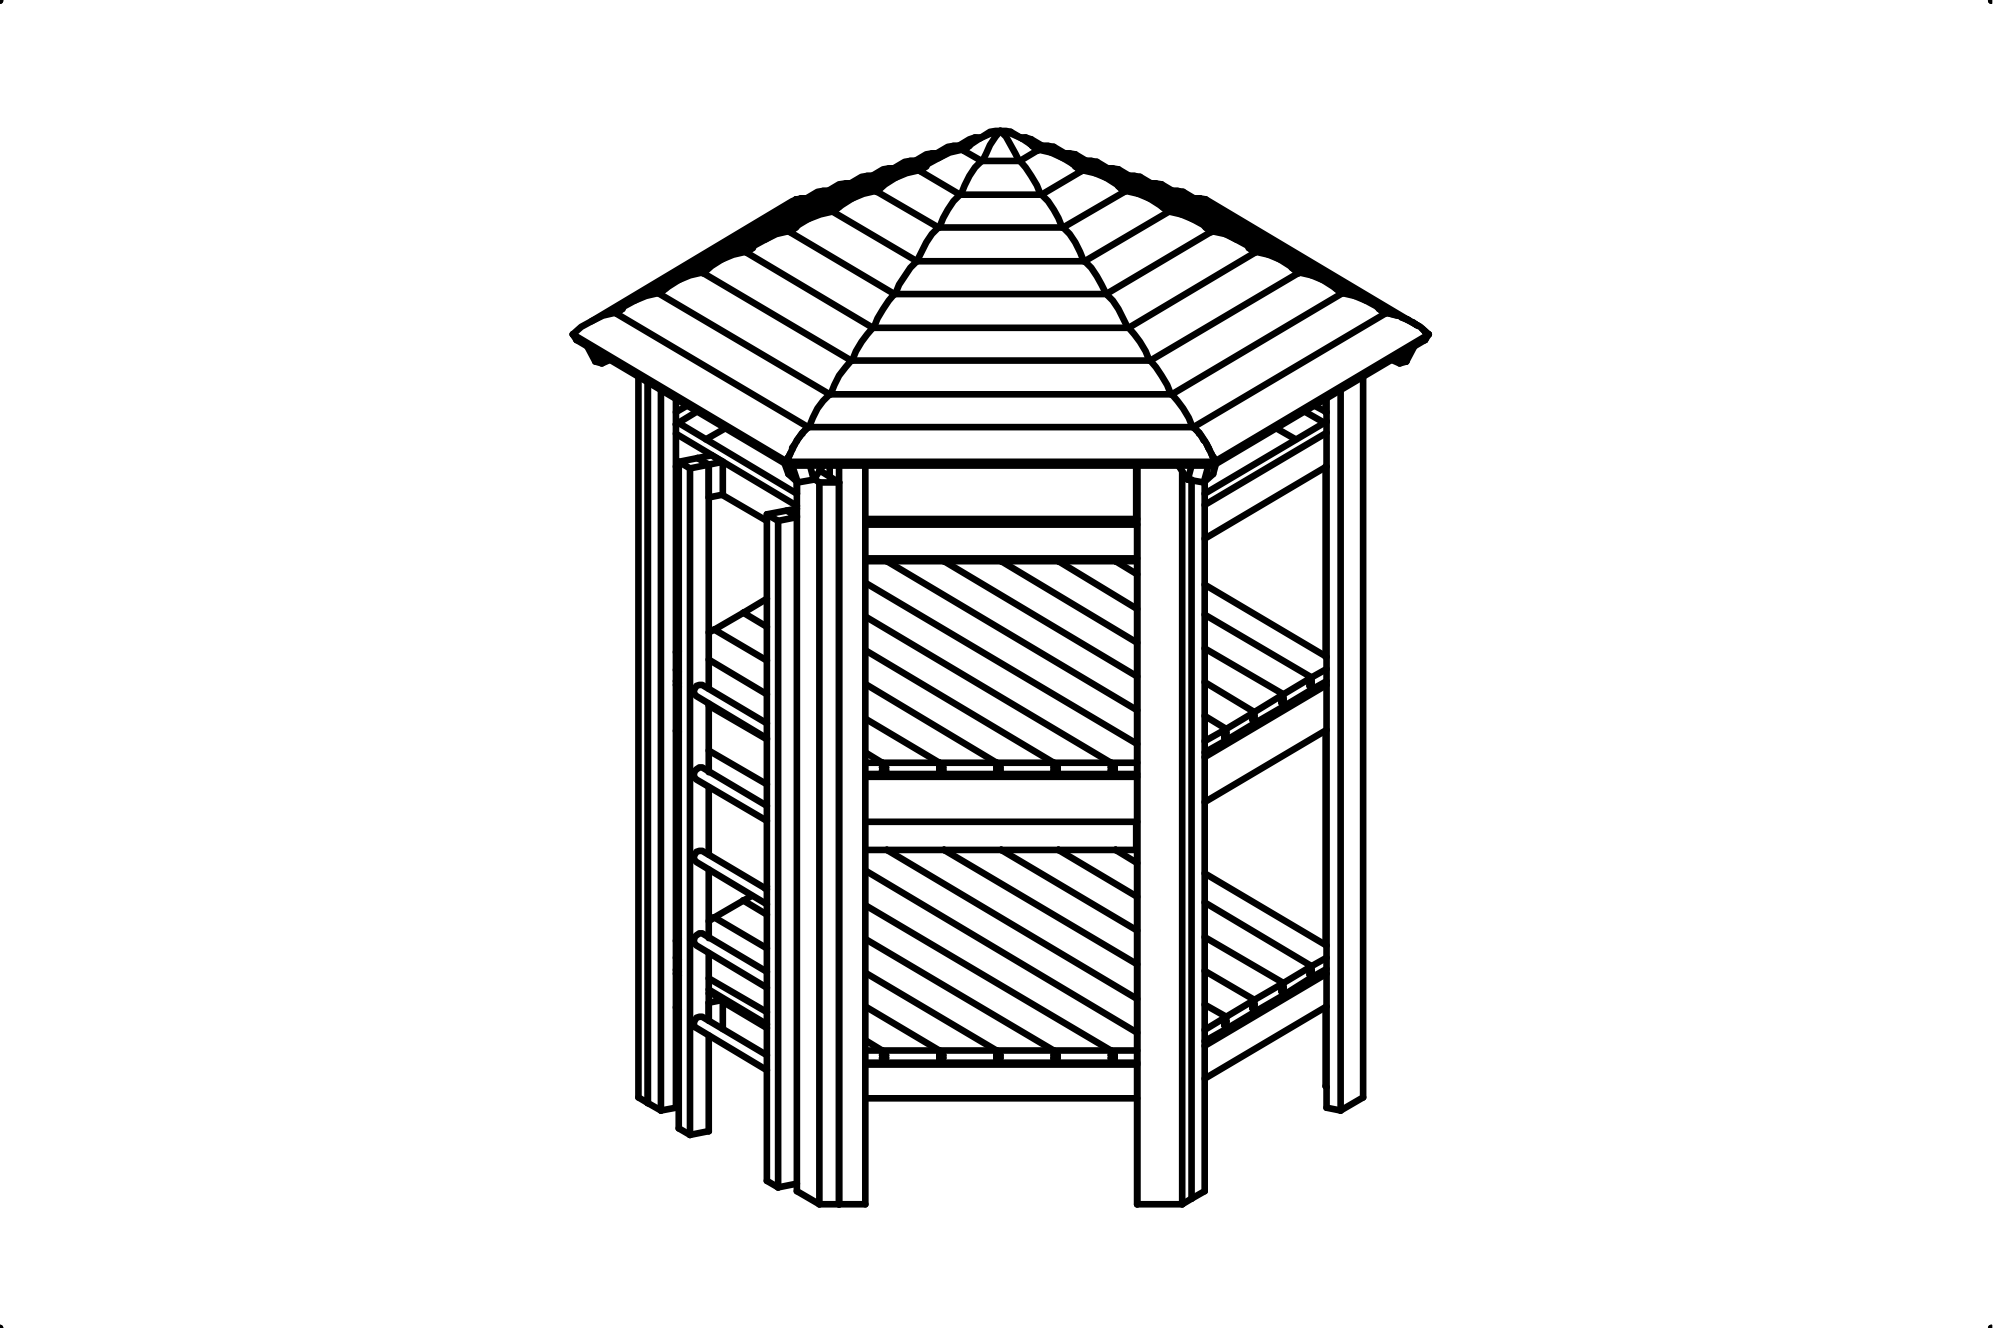 Hexagonal Hut with roof made of non-impregnated mountain larch